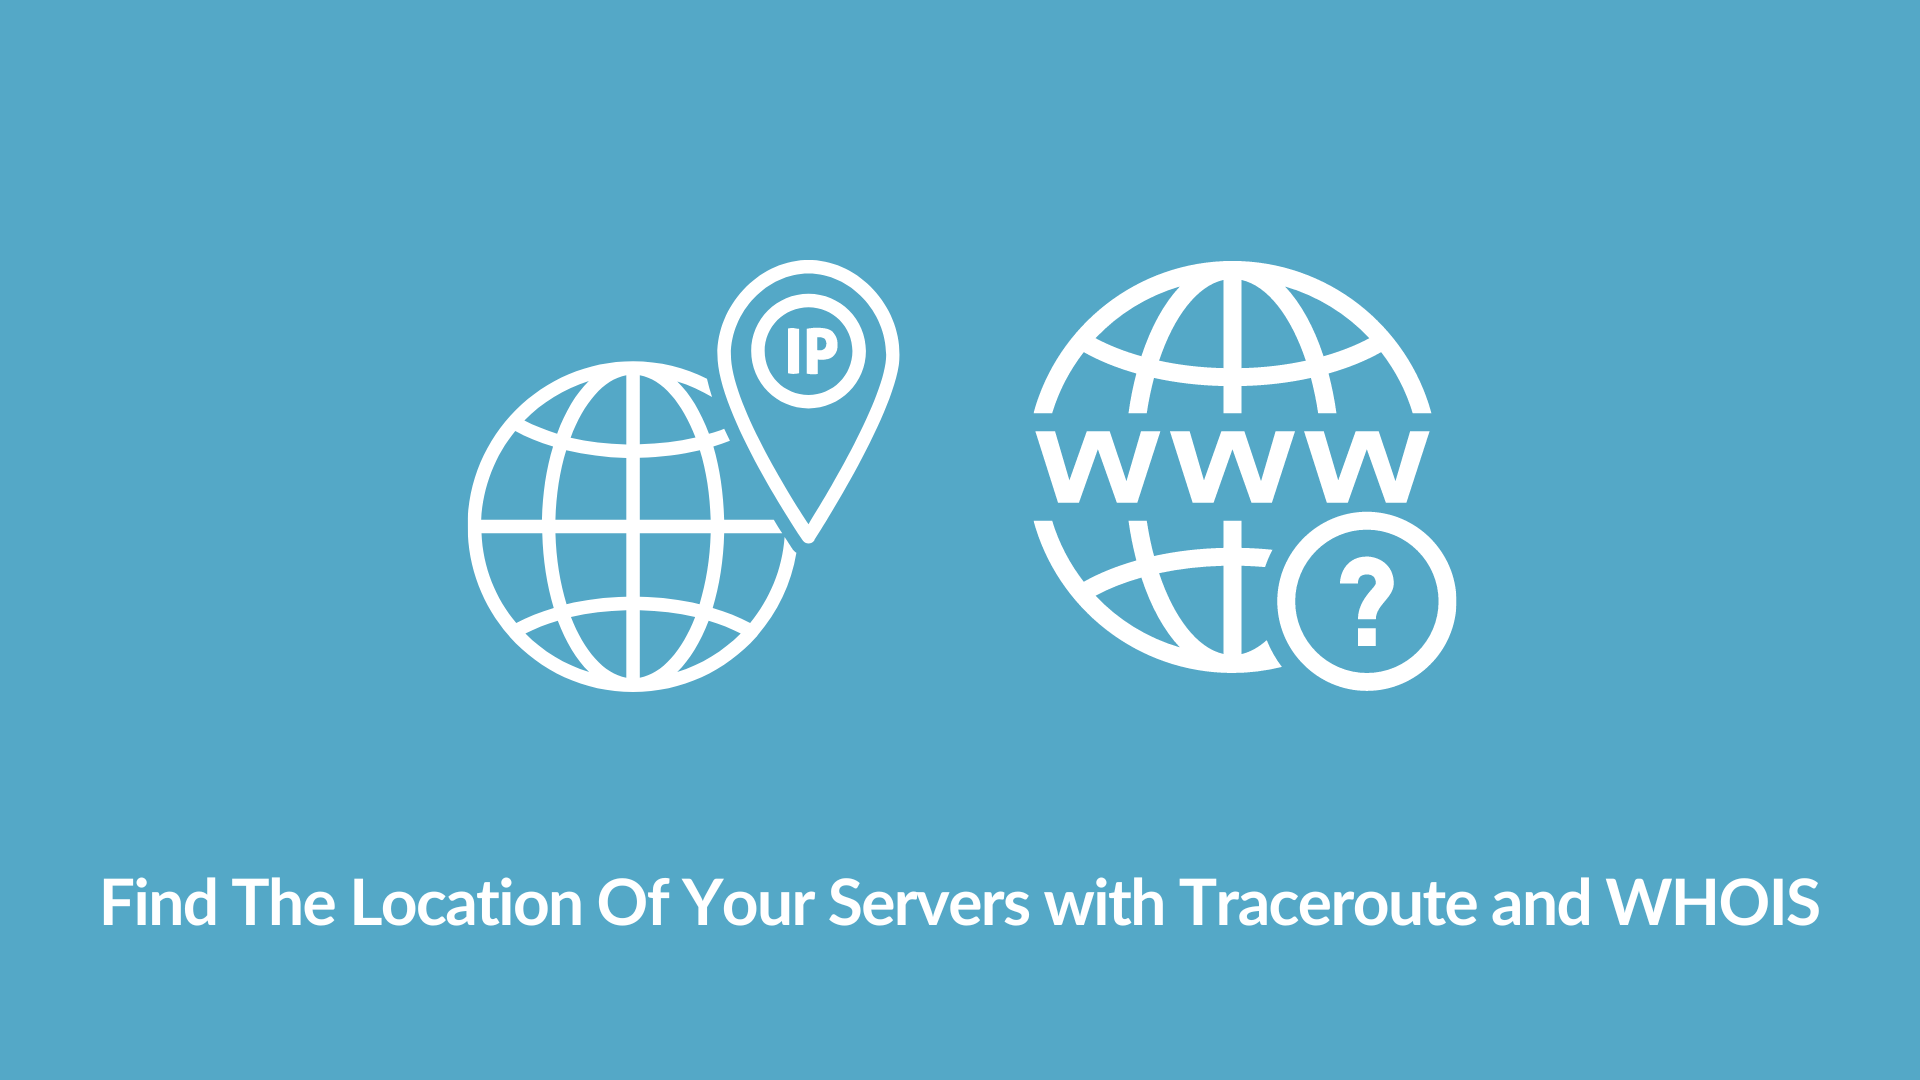 How to Find The Location Of Your Servers with Traceroute and WHOIS 